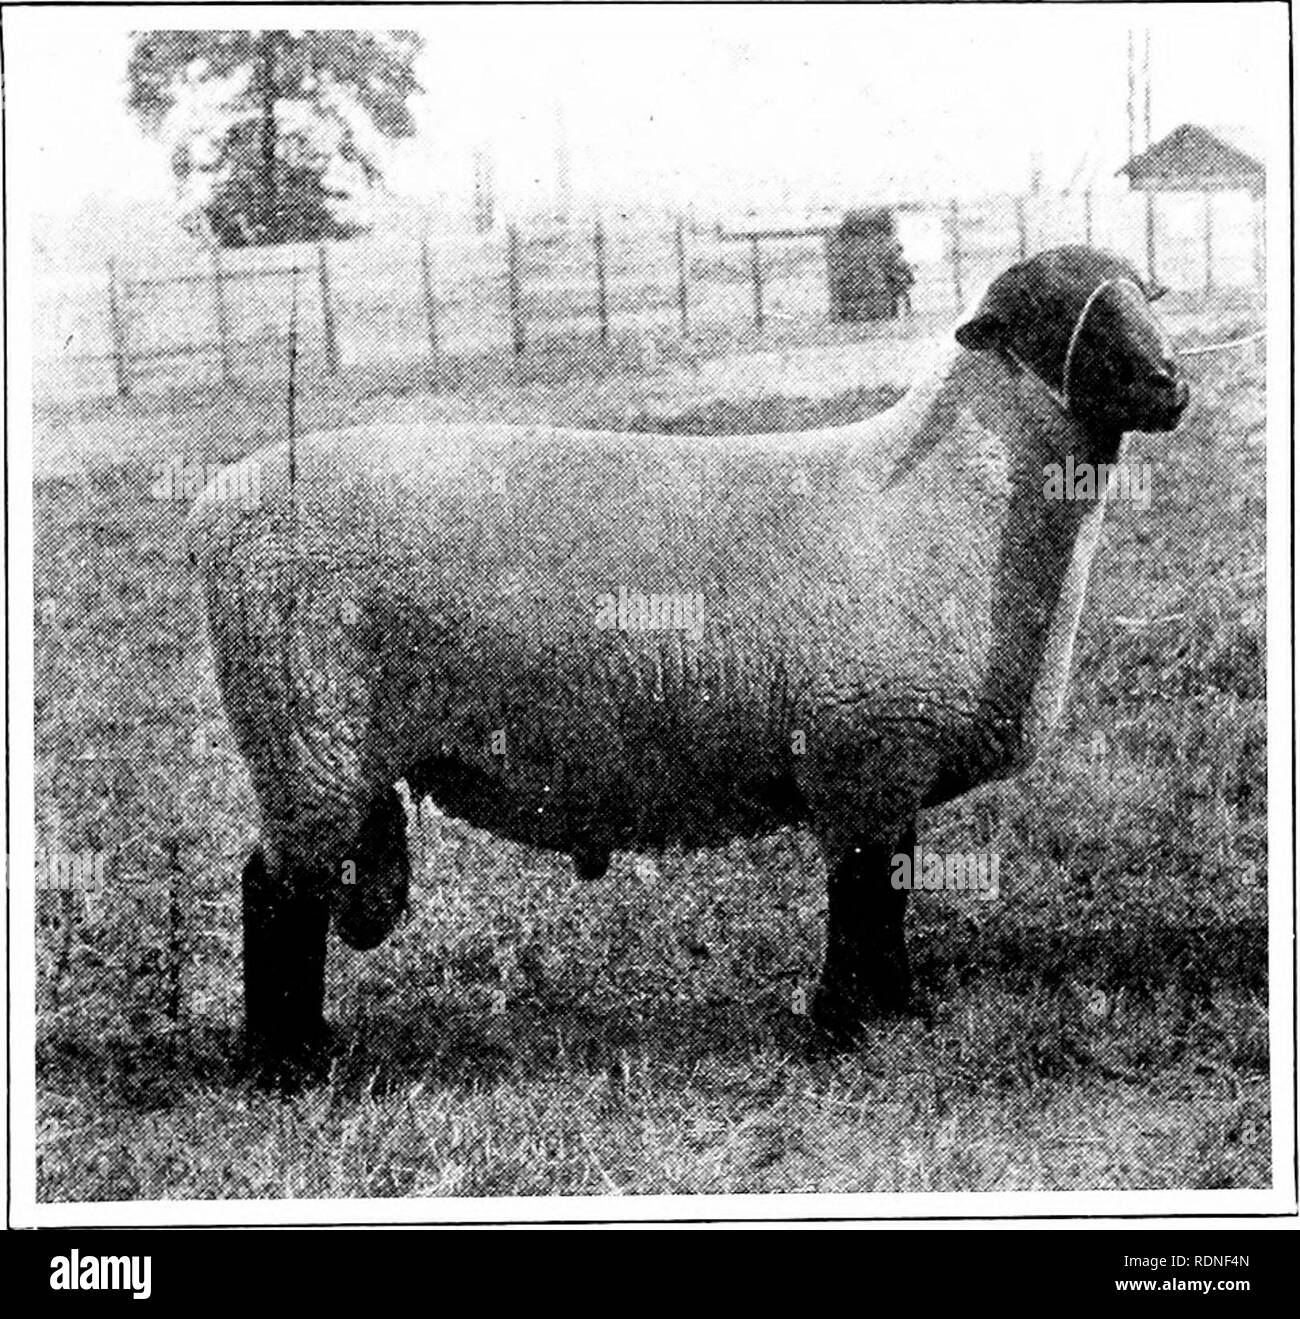 . Sheep farming in America . Sheep and sheep breeding. FLOCK HUSBANDRY IN WESTERN STATES. Ill of the flocks till tliey approacli in excellence the qnality of the flocks of New Zealand and Ar- gentina. The writer once in Deptford Mar- ket, where the live cattle and sheep sent to Lon- don from foreign ports are slaughtered, was shocked to see how much better were the. SUFFOLK RAM. strangers' sheep than those of his bretliren. Needless to say that the good sheep brought much the better prices. To thus upbuild our range flocks needs a steady inflow of the best rams, mainly of Kam-. Please note tha Stock Photo